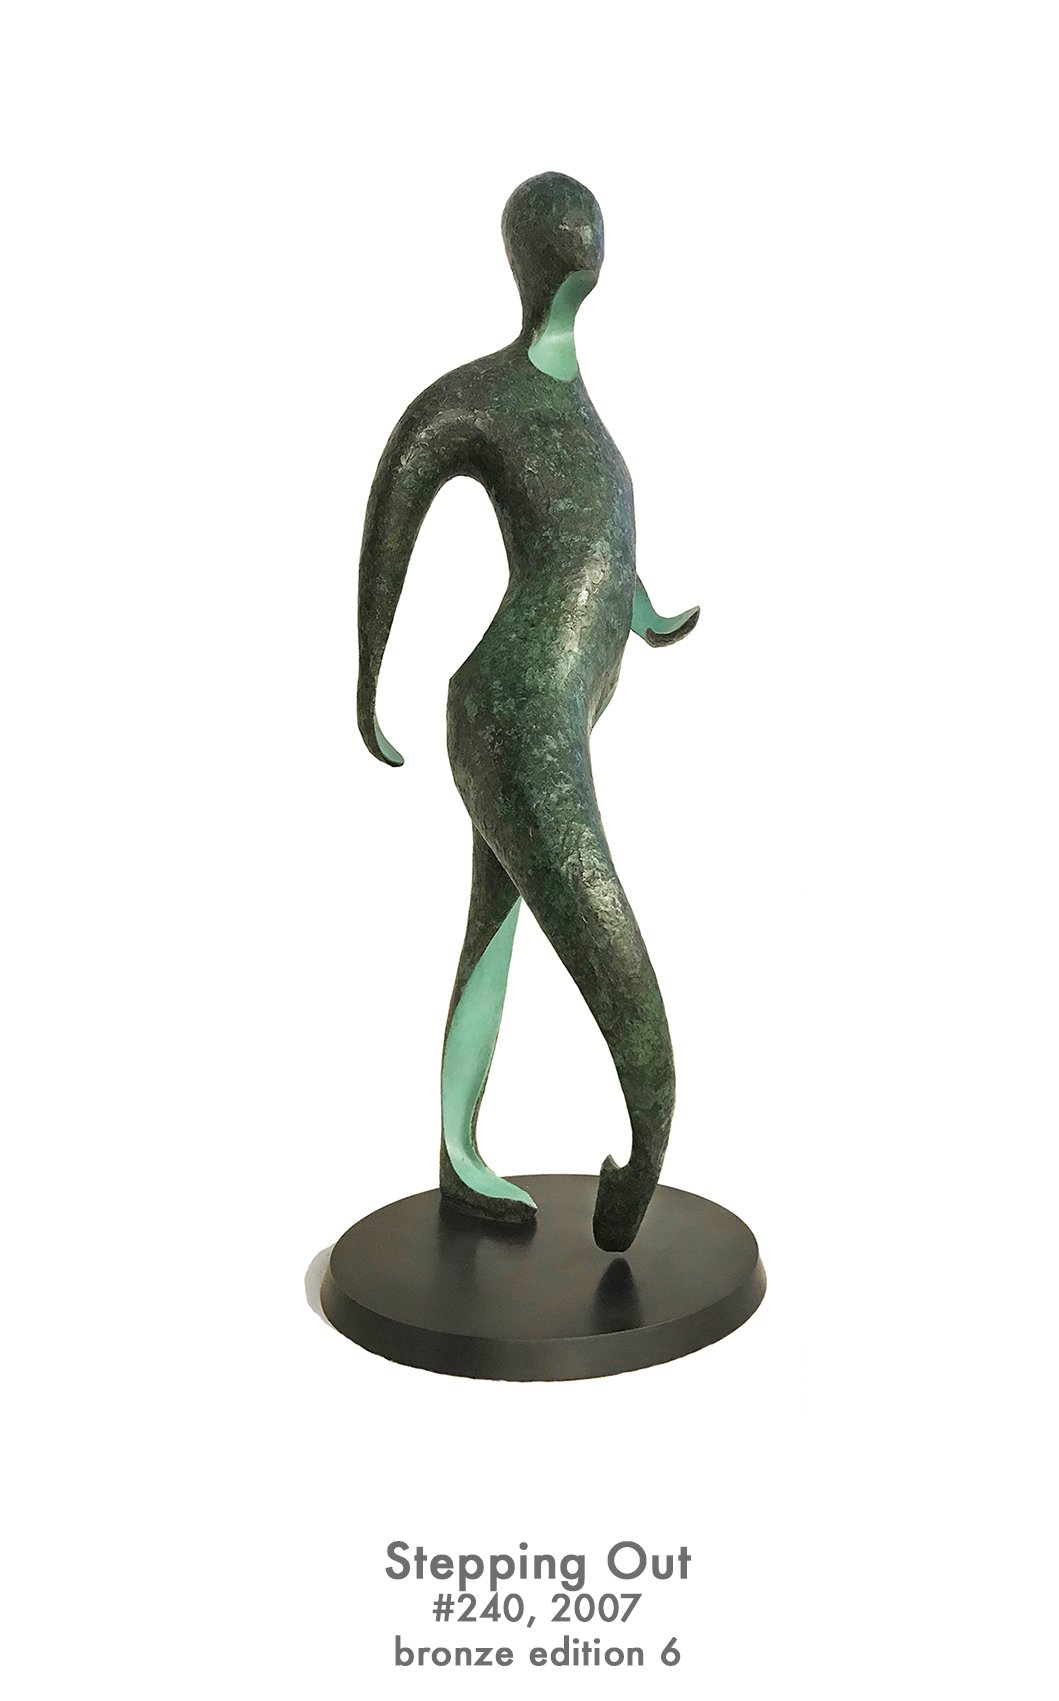 Stepping Out, bronze, 2007, #240